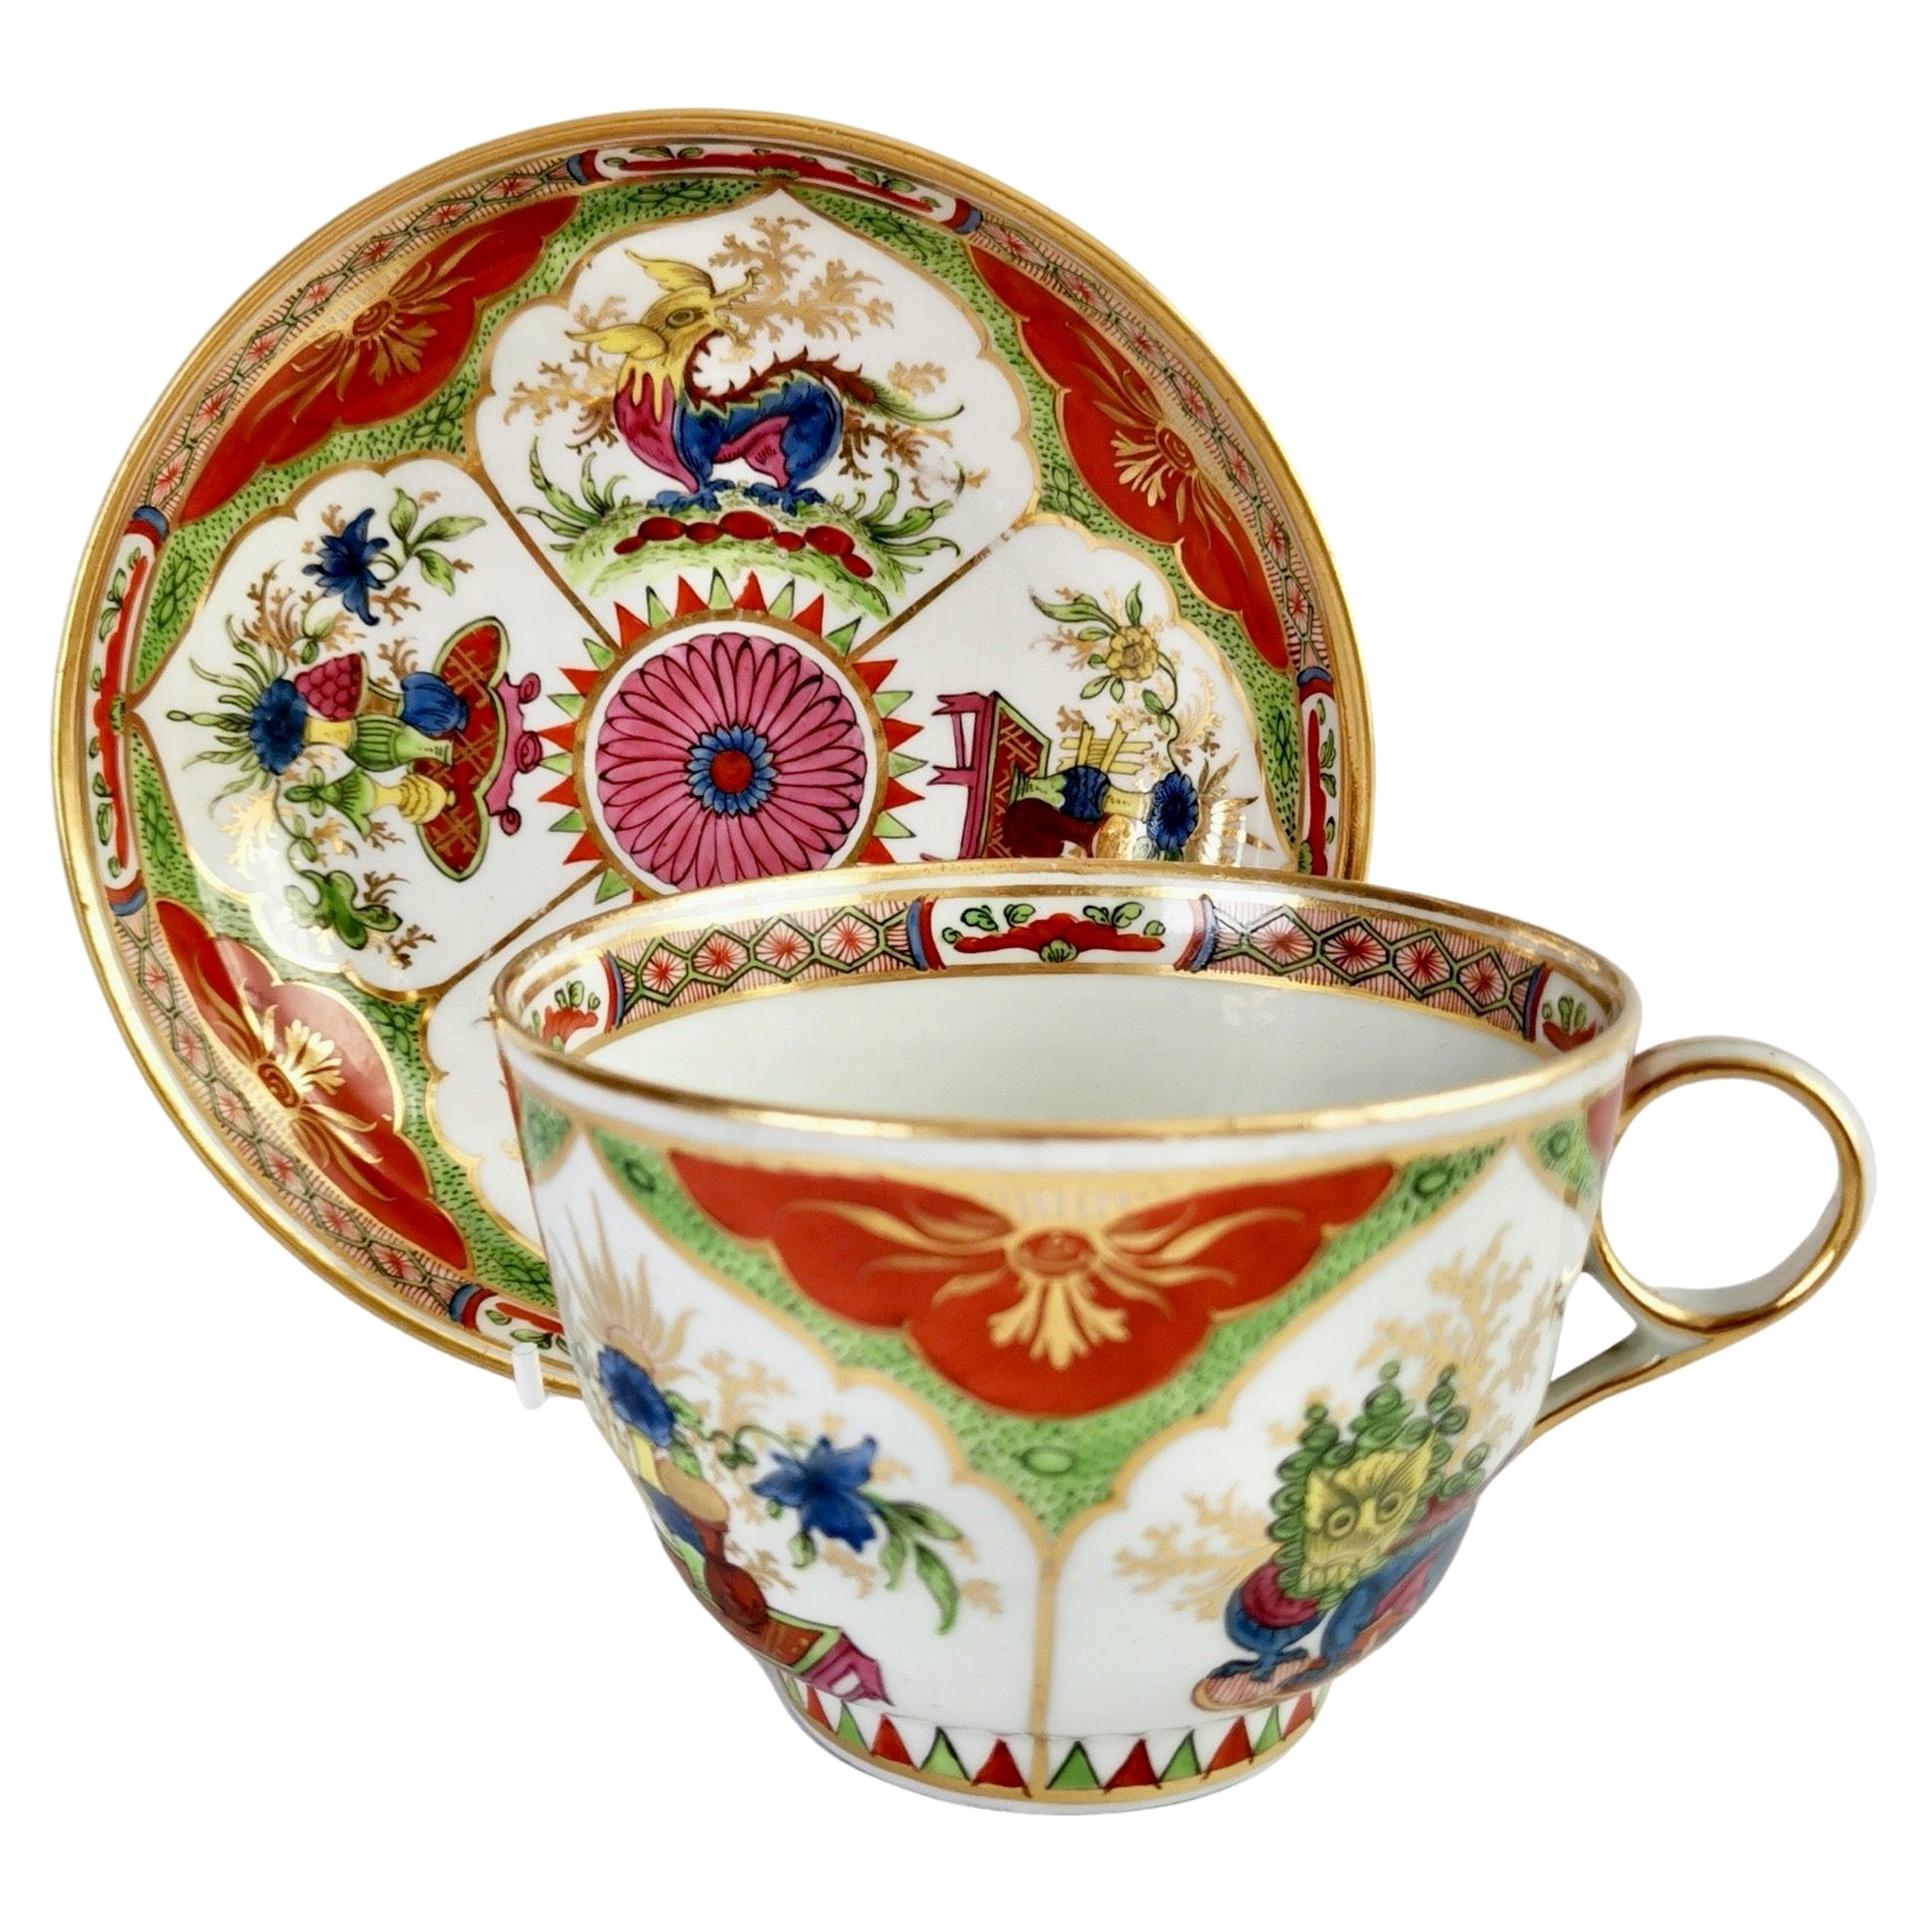 Chamberlains Worcester Porcelain Breakfast Cup, Dragons in Compartments, Ca 1800